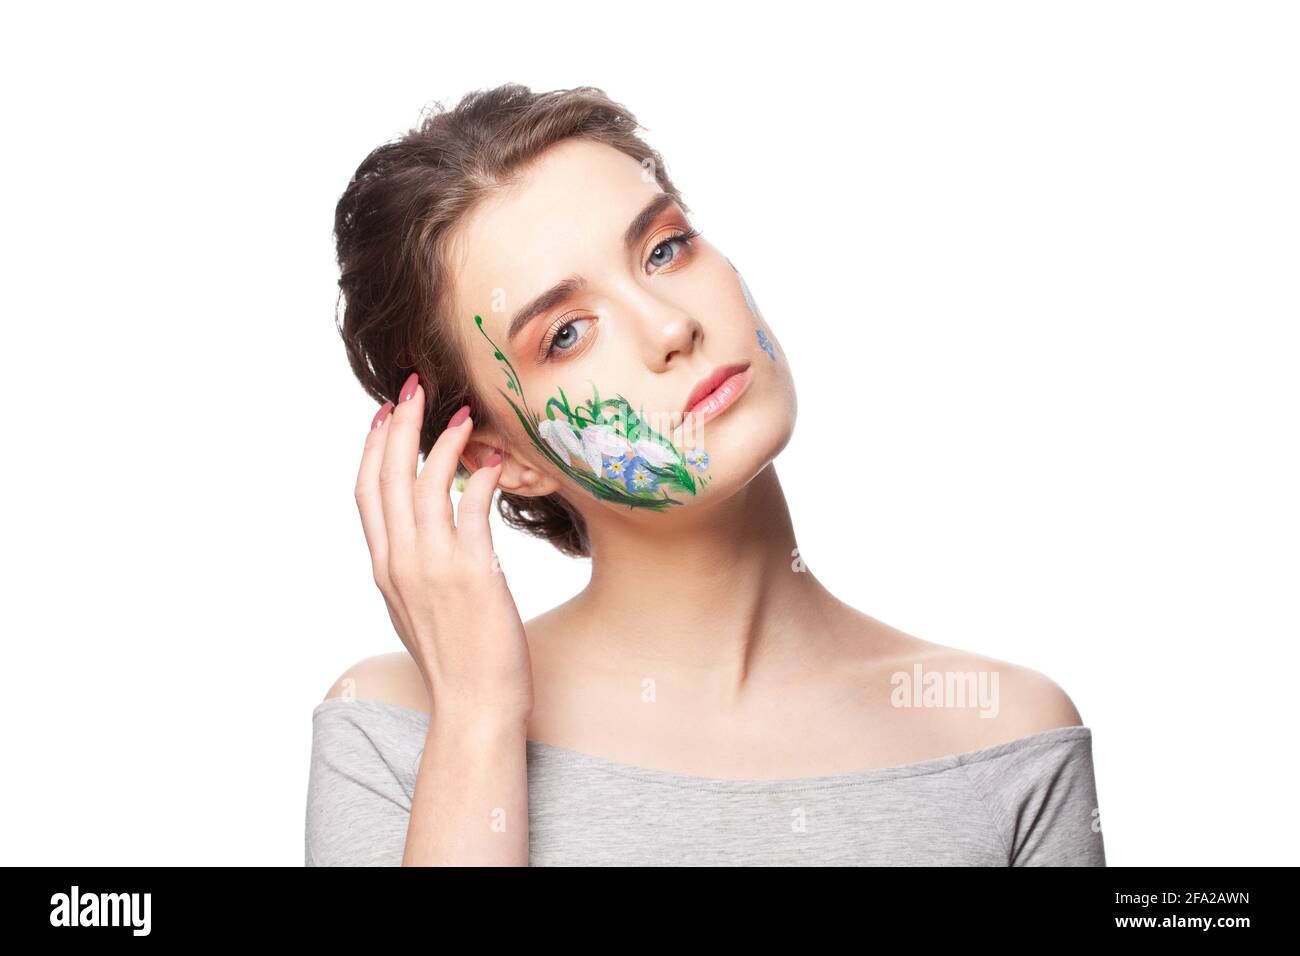 Spring young woman with painted flowers on her face isolated on white background Stock Photo